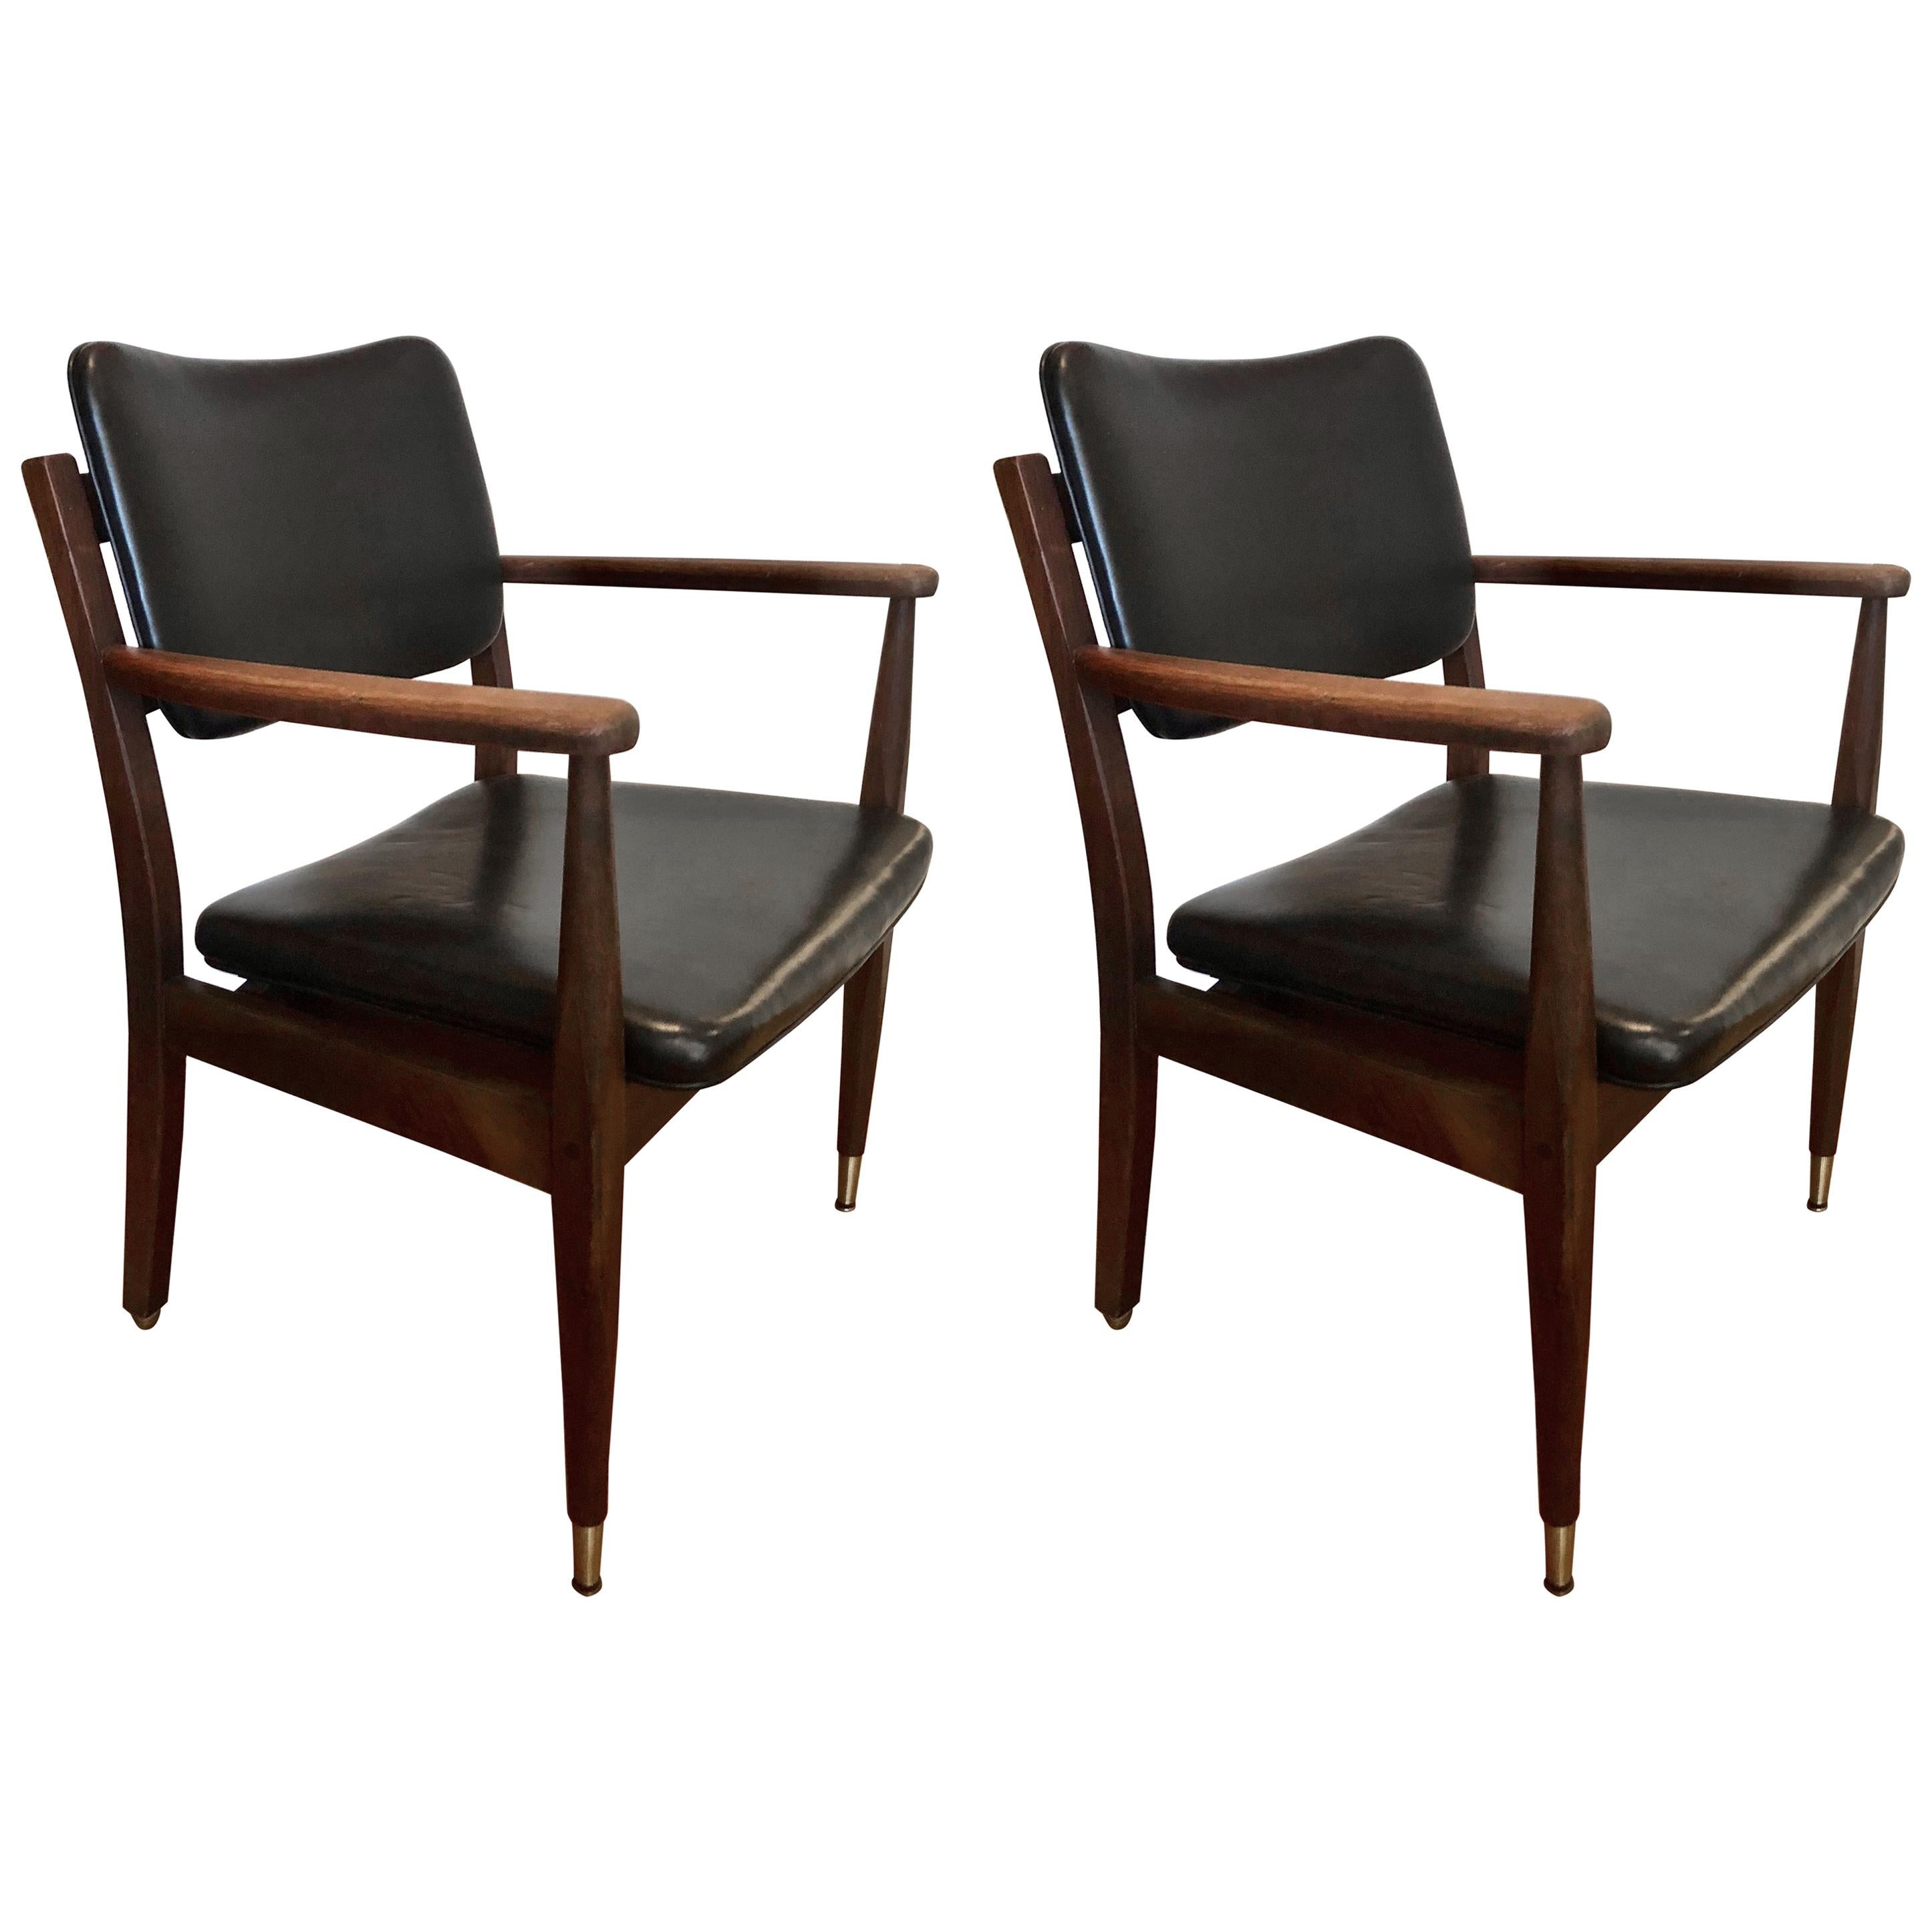 Pair of Armchairs with Brass Sabots, USA Circa 1955